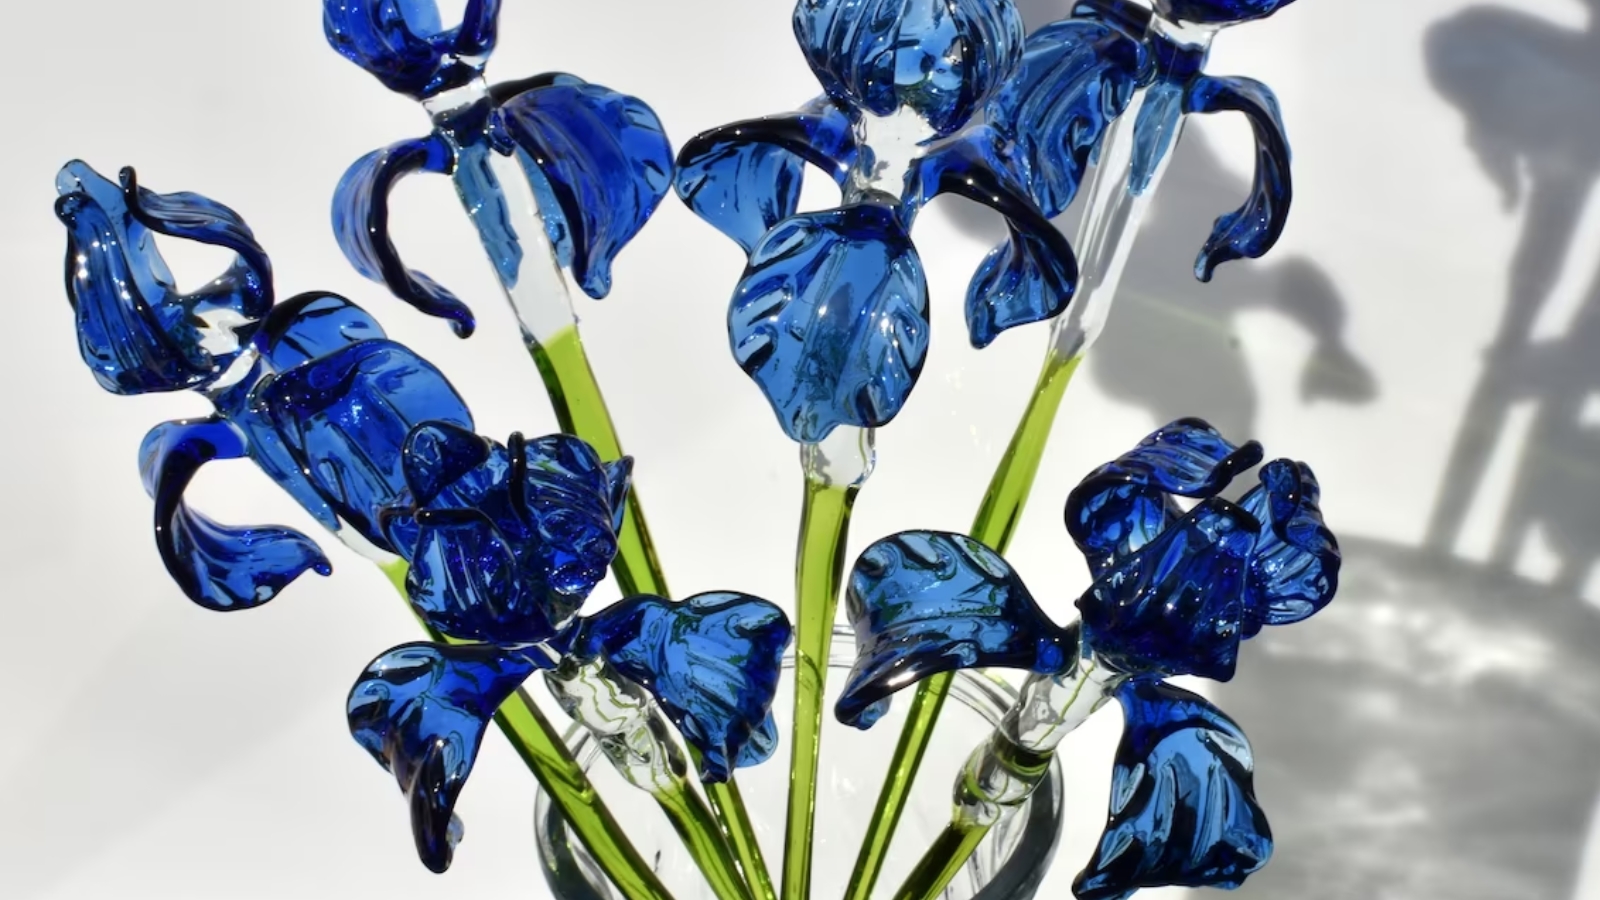 collectible statue of an iris flower made of blue glass with an extra-long design